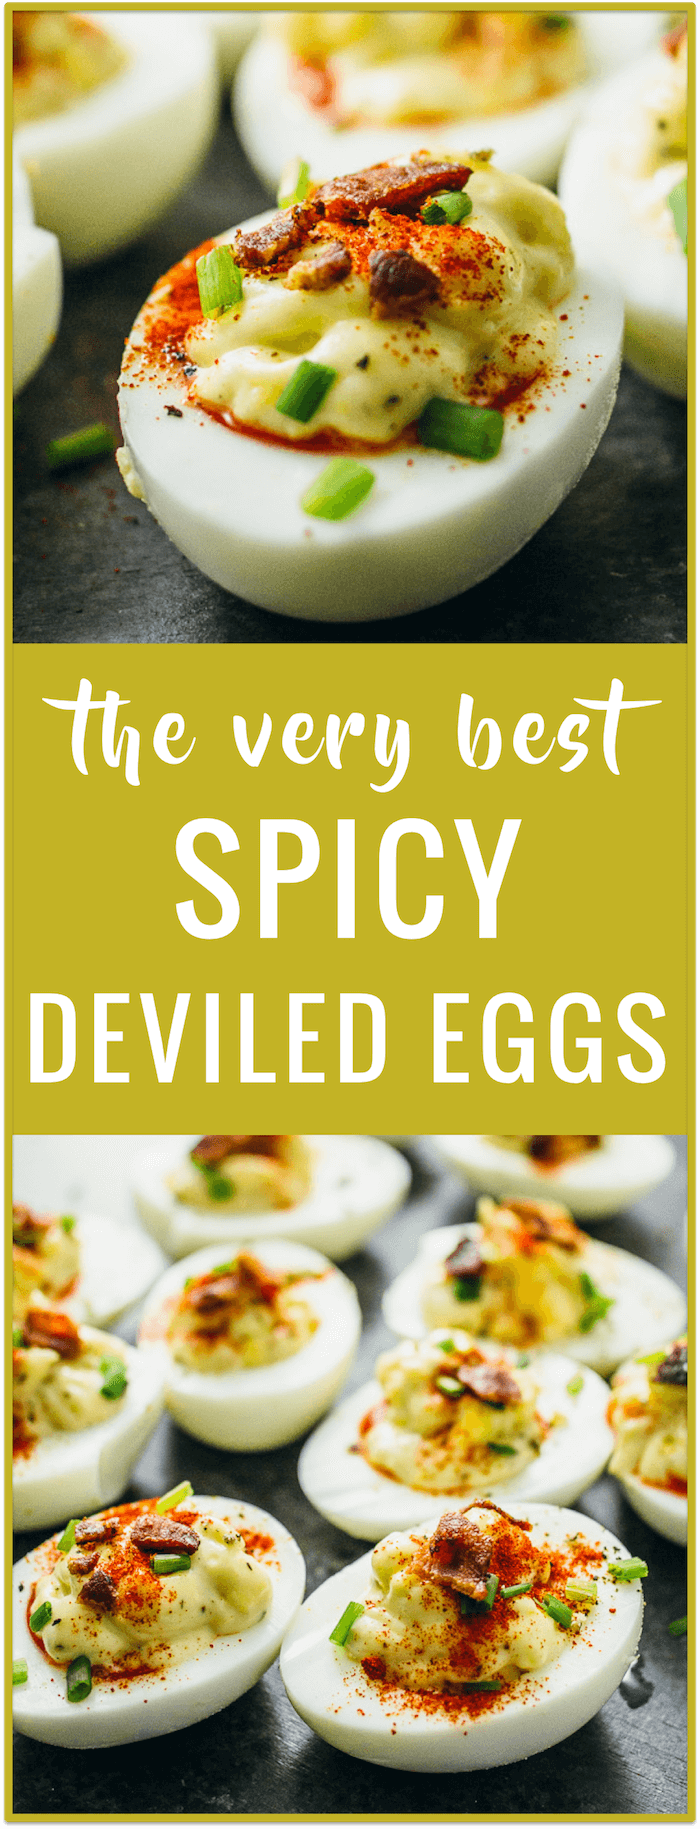 Best spicy deviled eggs - savory tooth